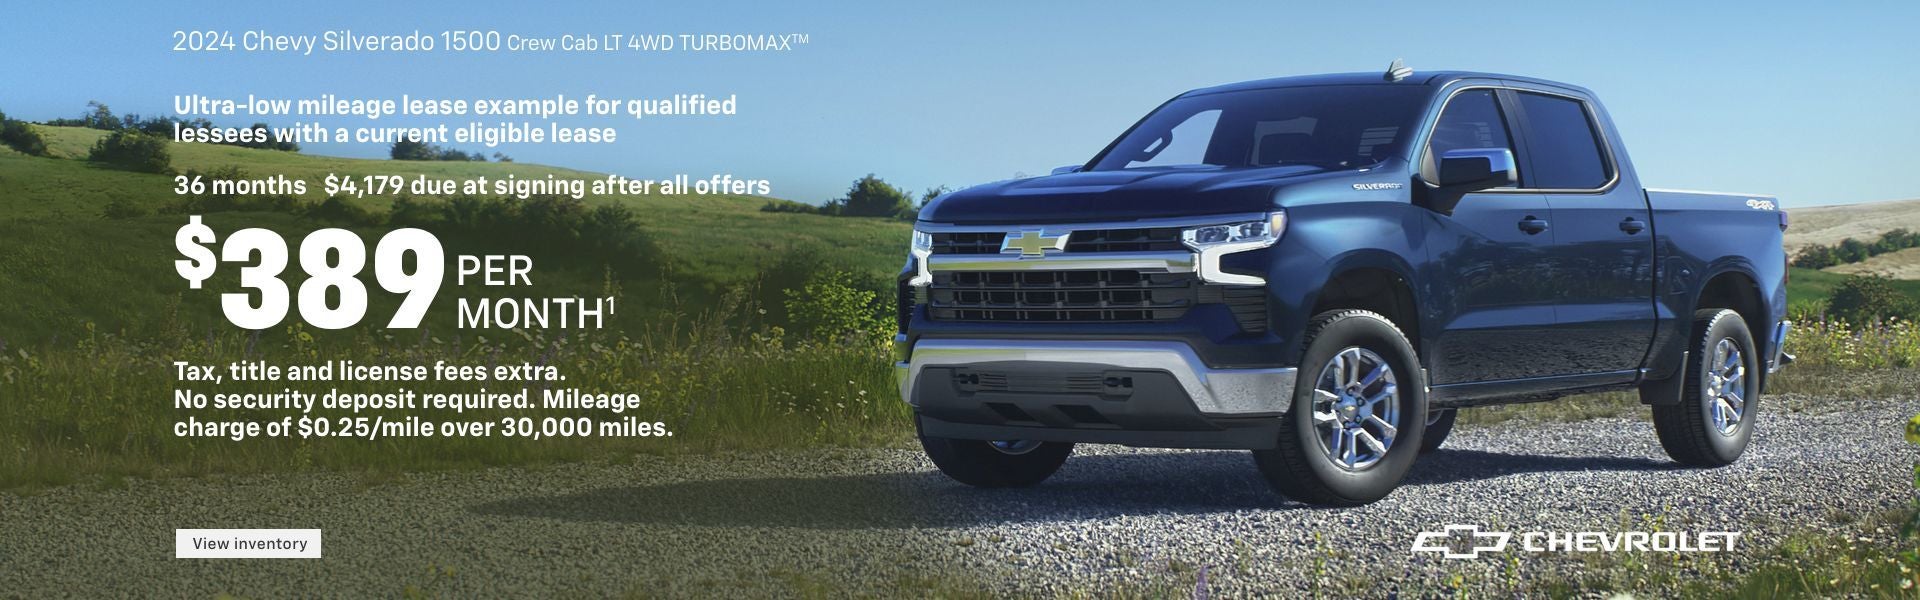 2024 Chevy Silverado 1500 Crew Cab LT 4WD Turbomax. Ultra-low mileage lease example for qualified...